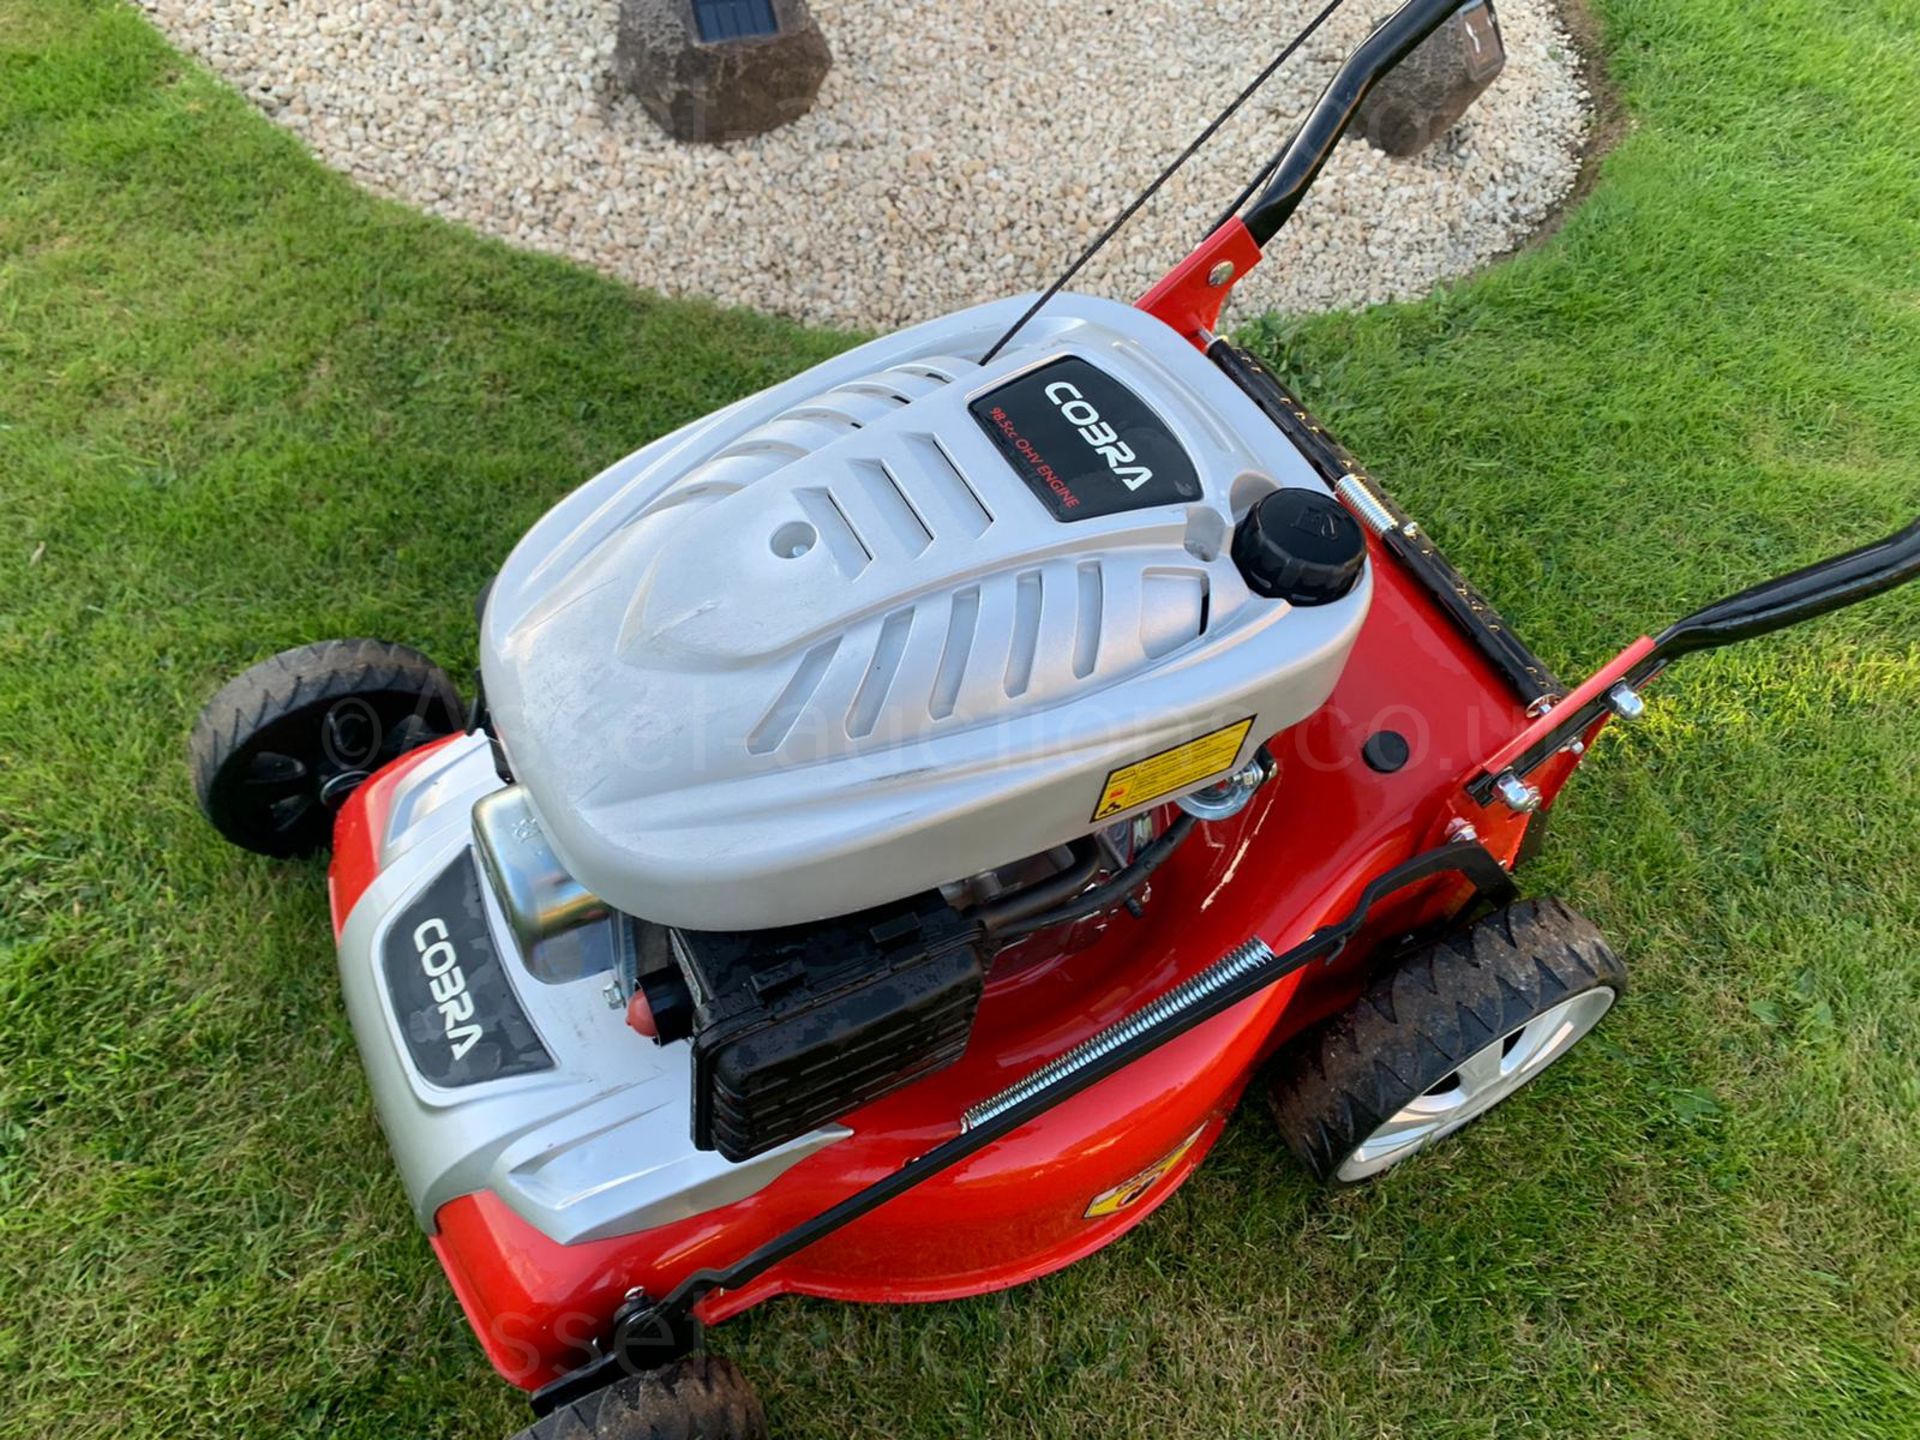 2016 COBRA M40C LAWN MOWER, RUNS AND WORKS WELL, ONLY USED A FEW TIMES, PULL START *NO VAT* - Image 14 of 18